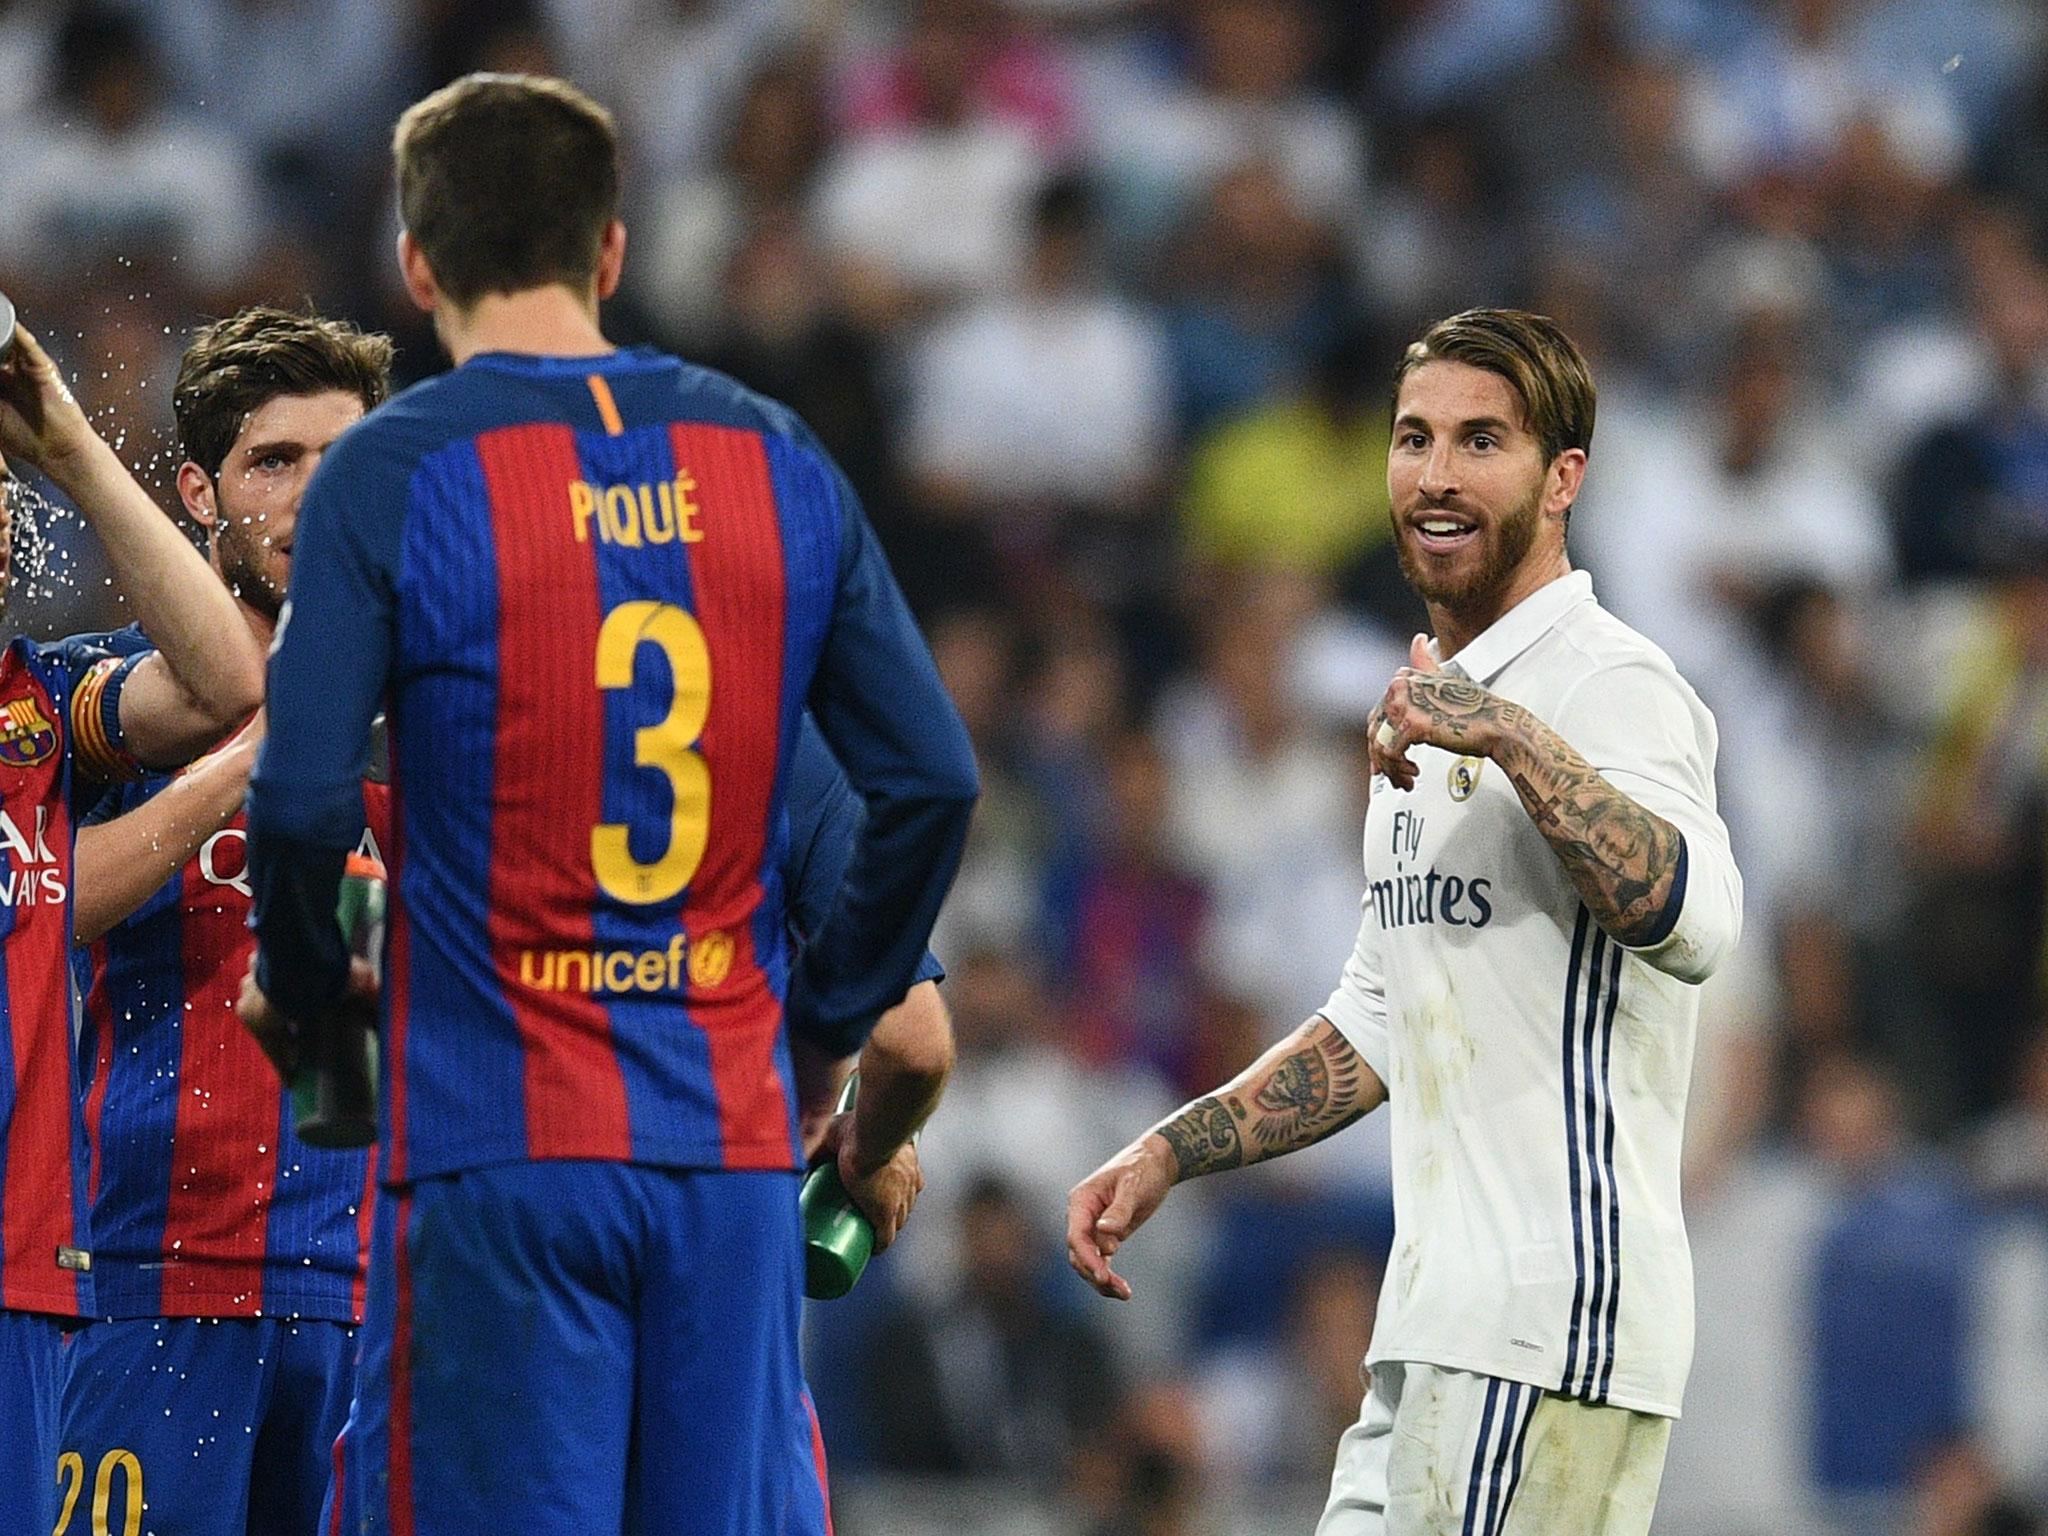 Sergio Ramos was shown a red card during el clasico and remonstrated with Gerard Pique as he left the field